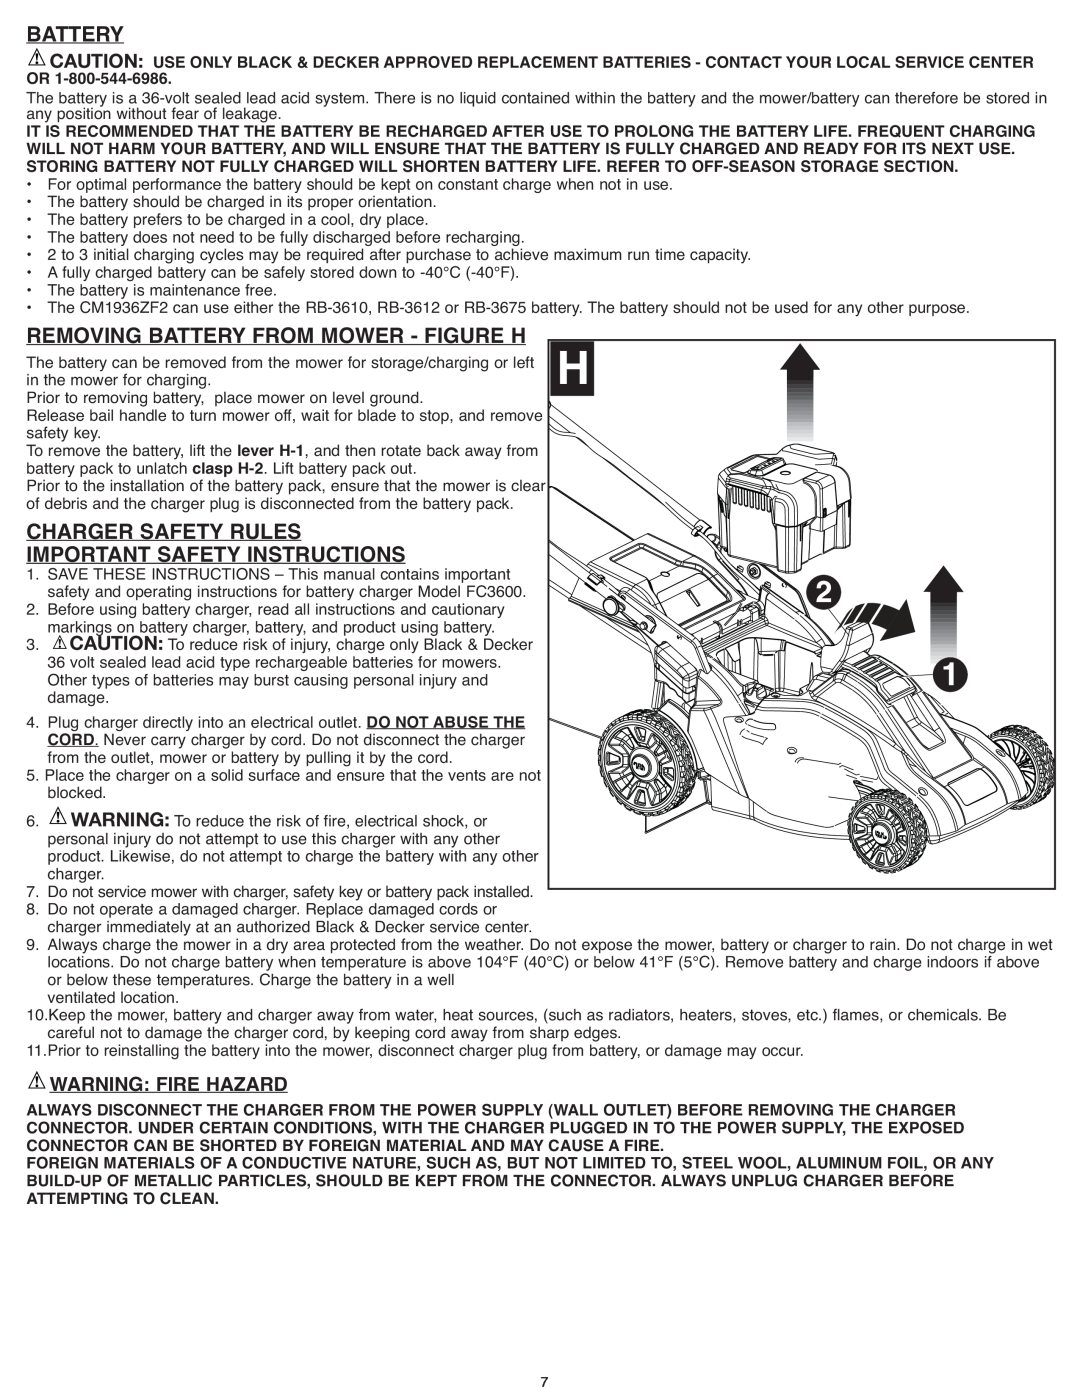 Black & Decker CM1936ZF2 Removing Battery From Mower - Figure H, Charger Safety Rules, Important Safety Instructions 